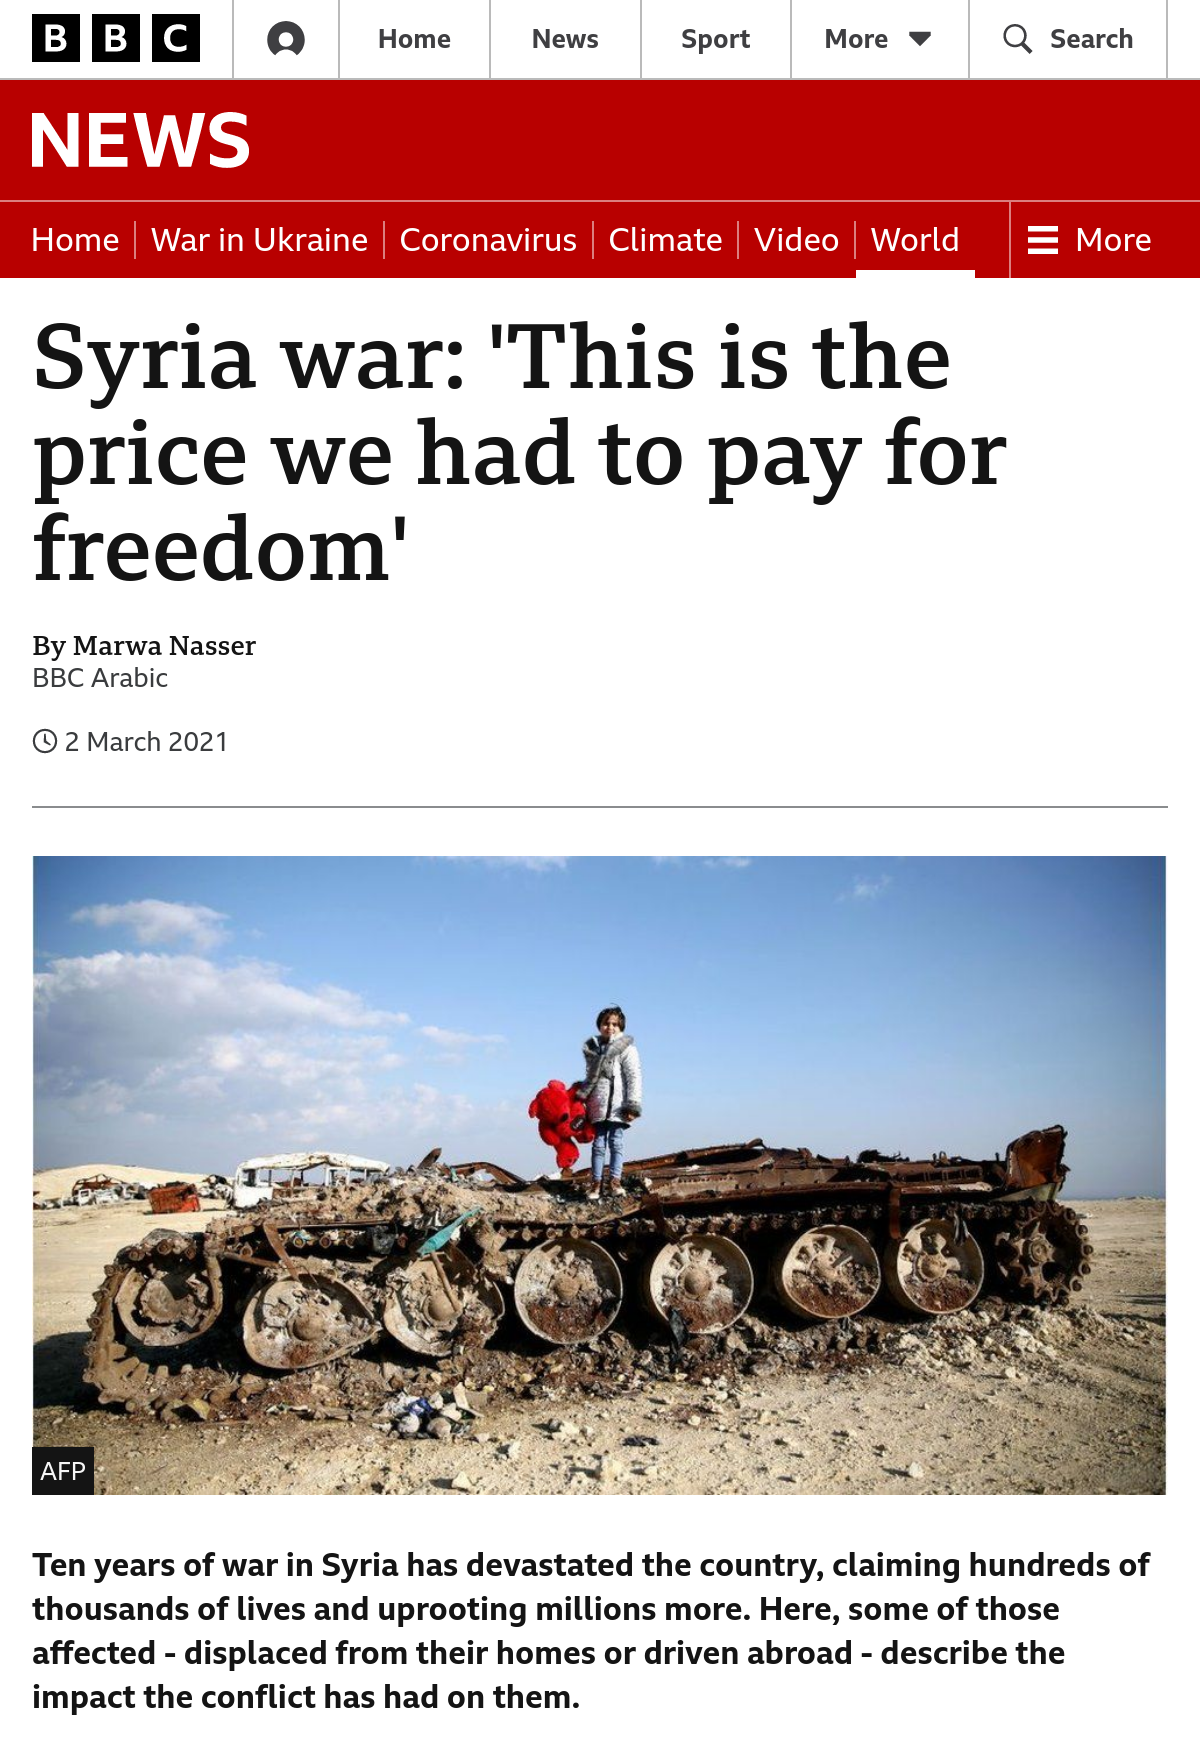 BBC - This is the price we had to pay for freedom